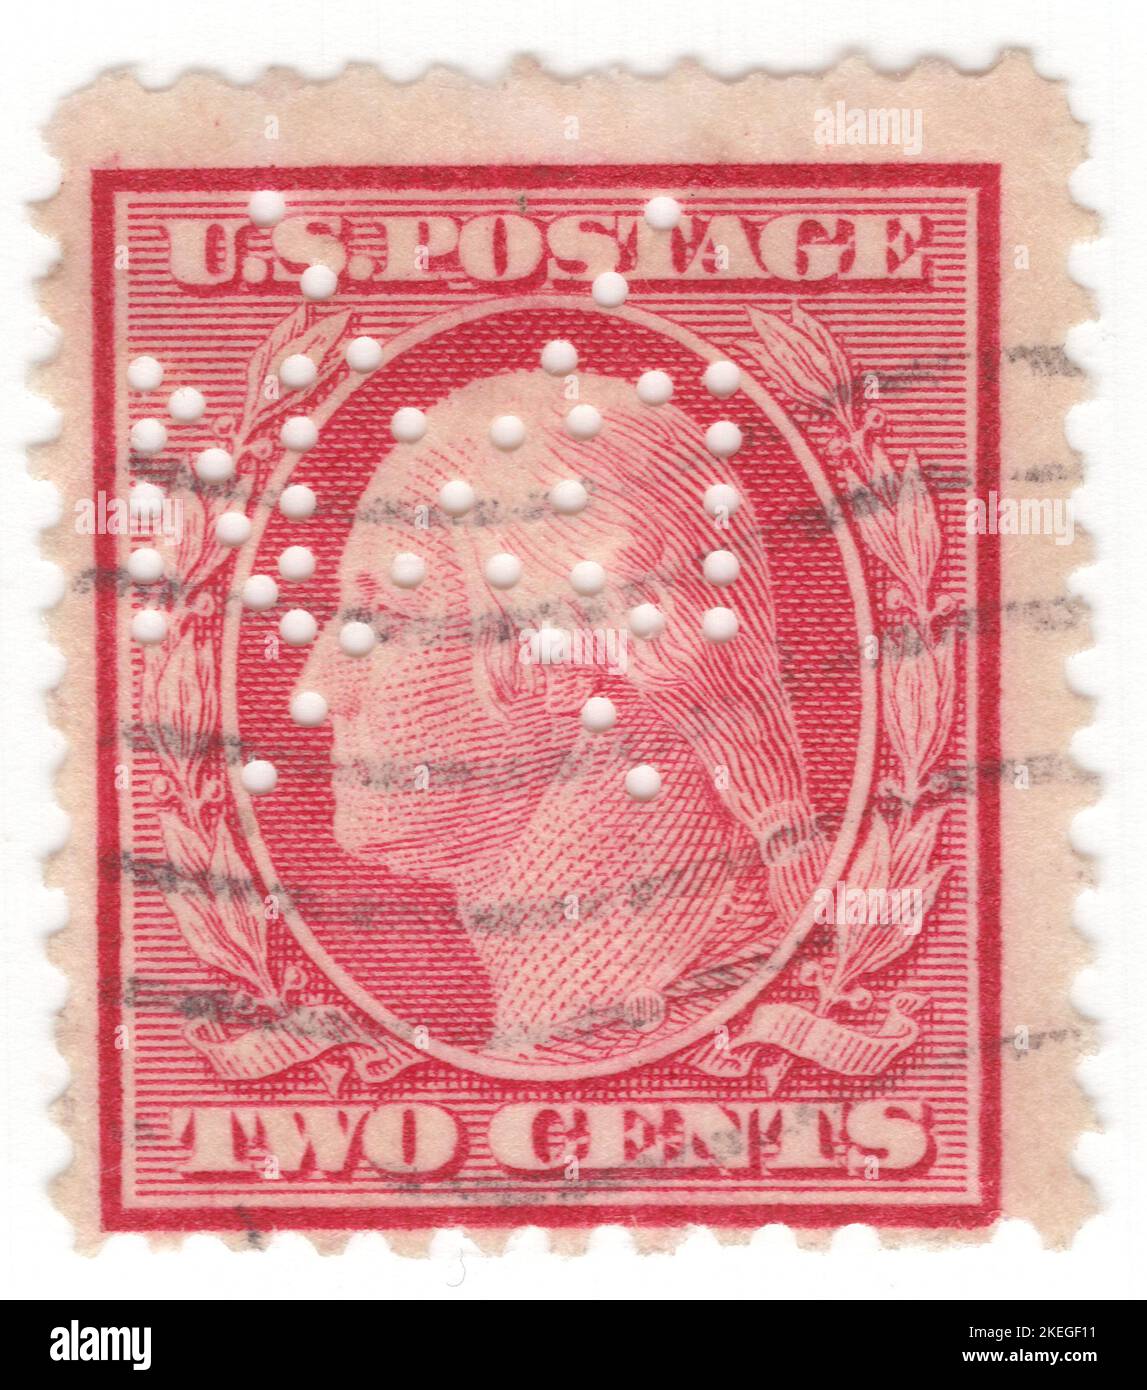 USA - 1908: An 2 cents carmine postage stamp depicting portrait of George Washington. American military officer, statesman, and Founding Father who served as the first president of the United States from 1789 to 1797. Appointed by the Continental Congress as commander of the Continental Army, Washington led the Patriot forces to victory in the American Revolutionary War and served as the president of the Constitutional Convention of 1787, which created the Constitution of the United States and the American federal government. Washington has been called the 'Father of his Country' Stock Photo